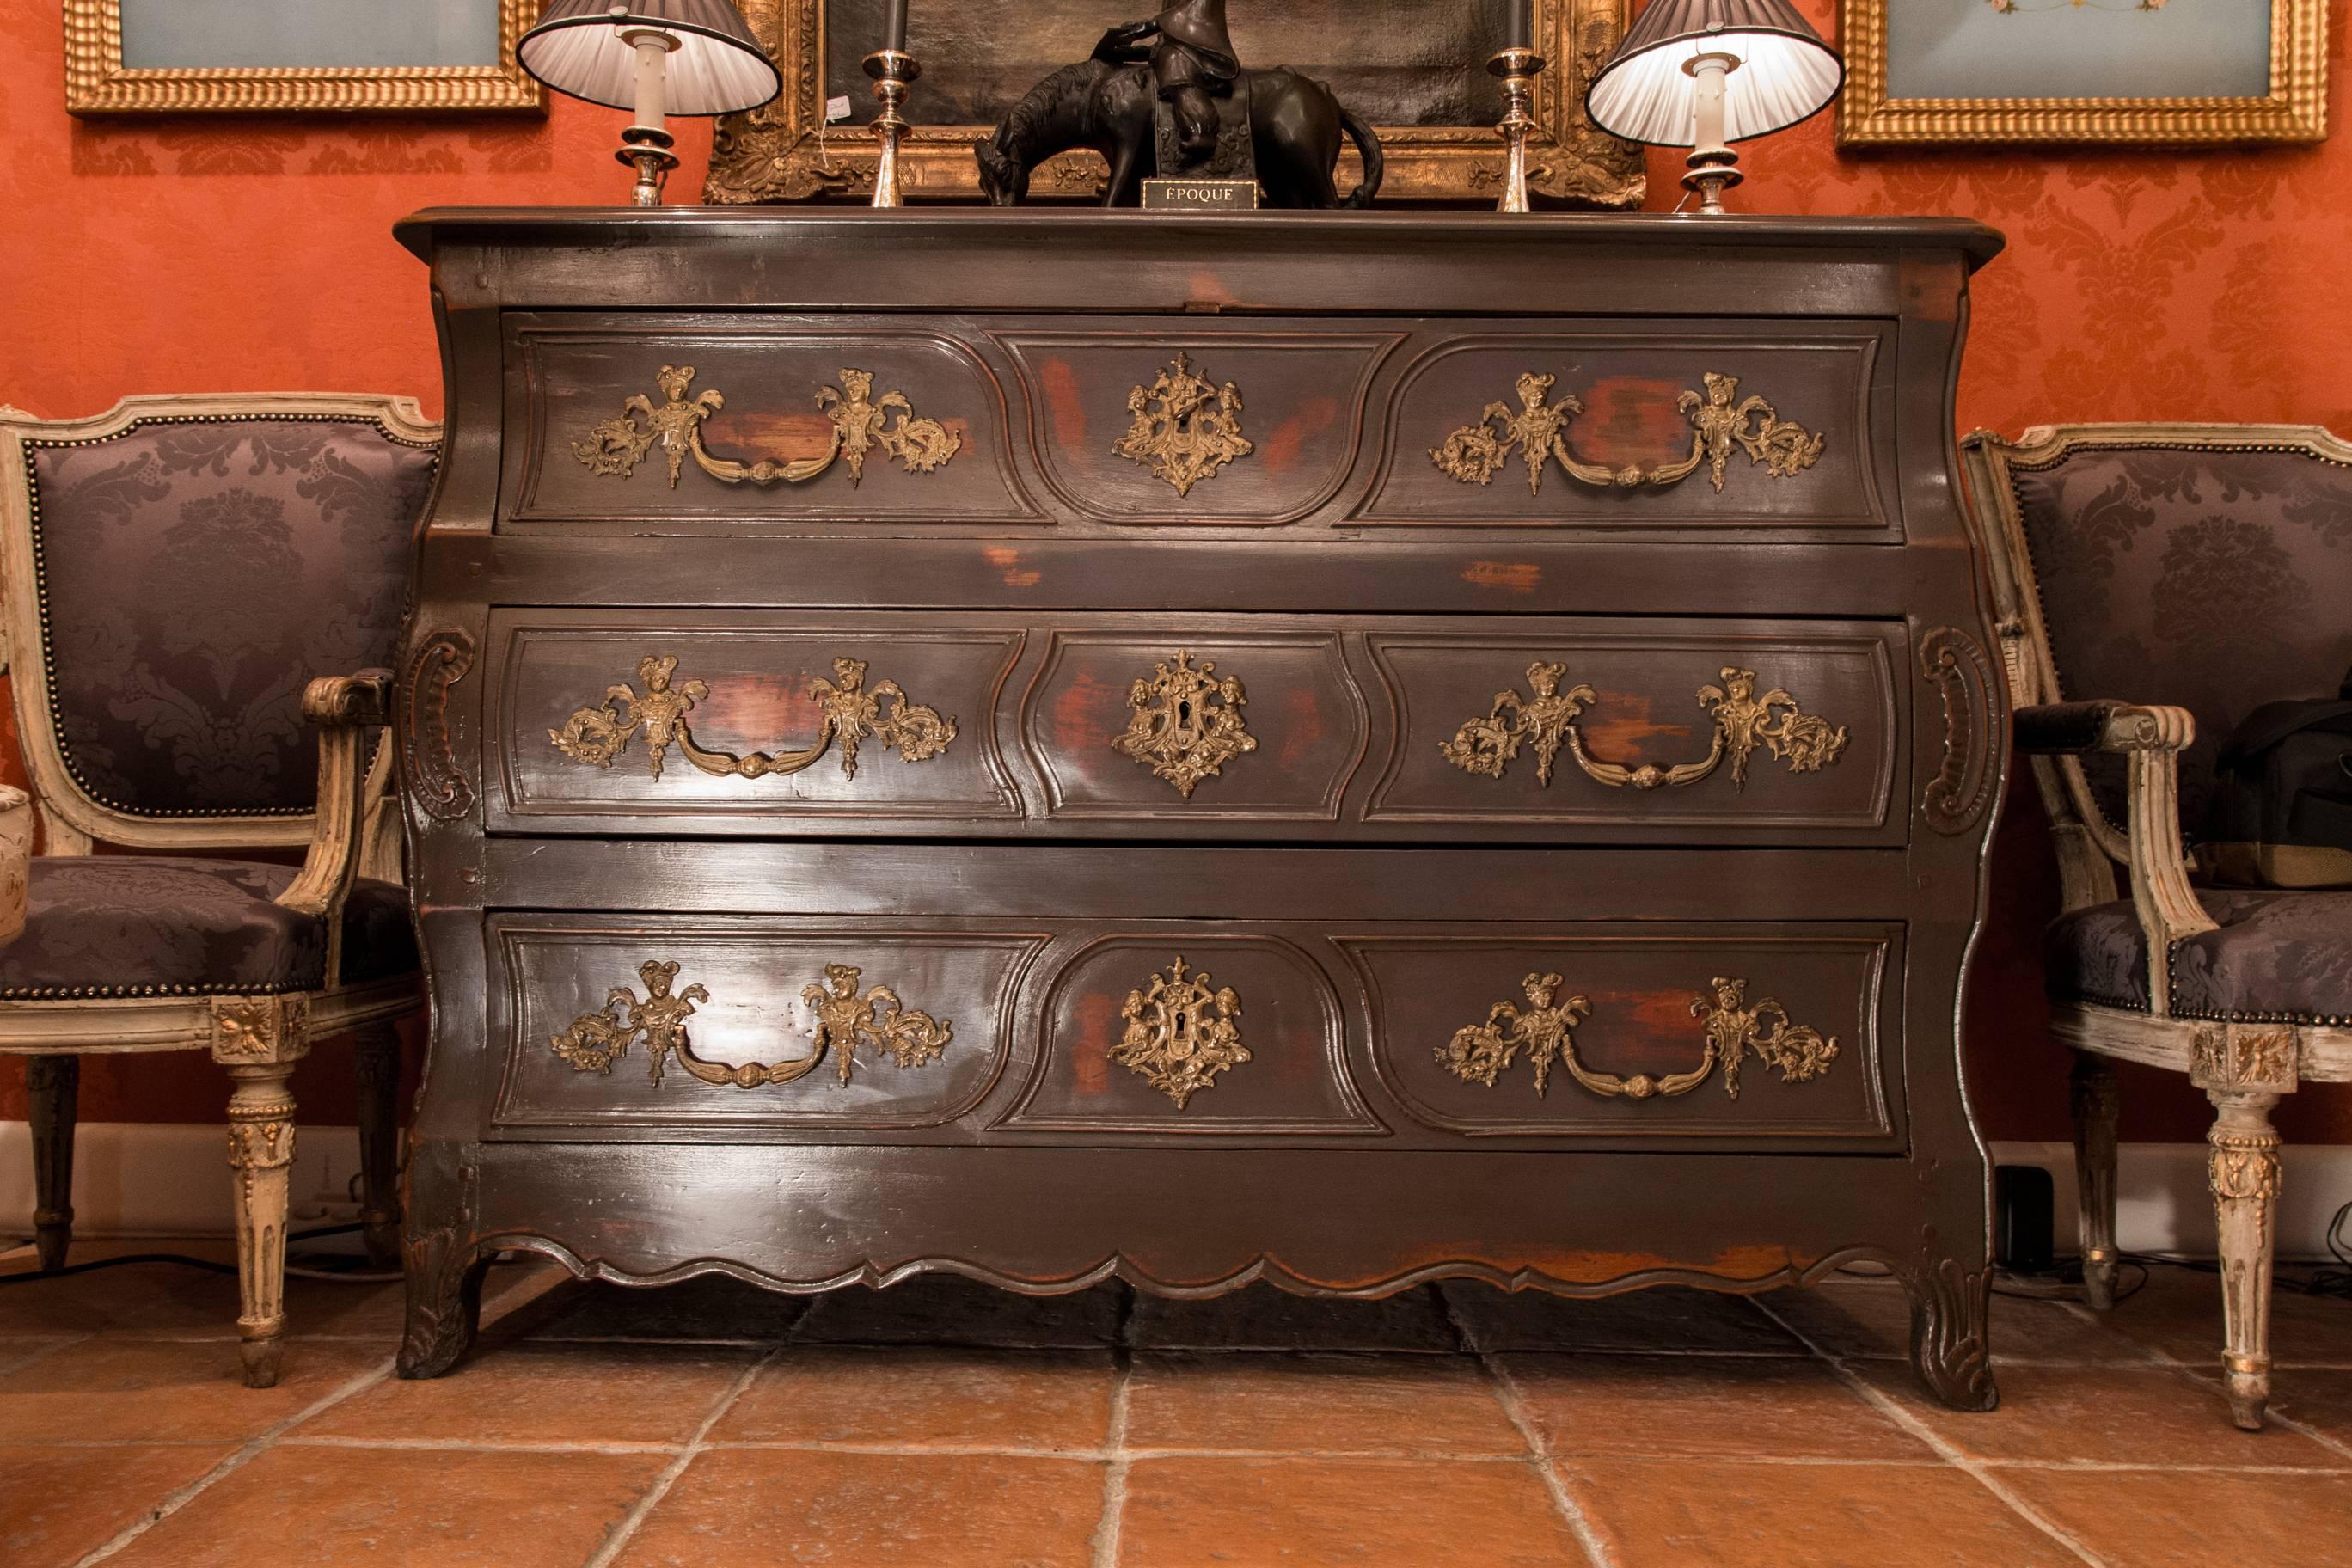 A decorative large French castle commode, in hand-carved wood painted in grey, opening by three large drawers with decorative gilt-bronze handles « Aux Valets ». Our chest rests on small serpentine foots. 

Provincial French work mid-18th century